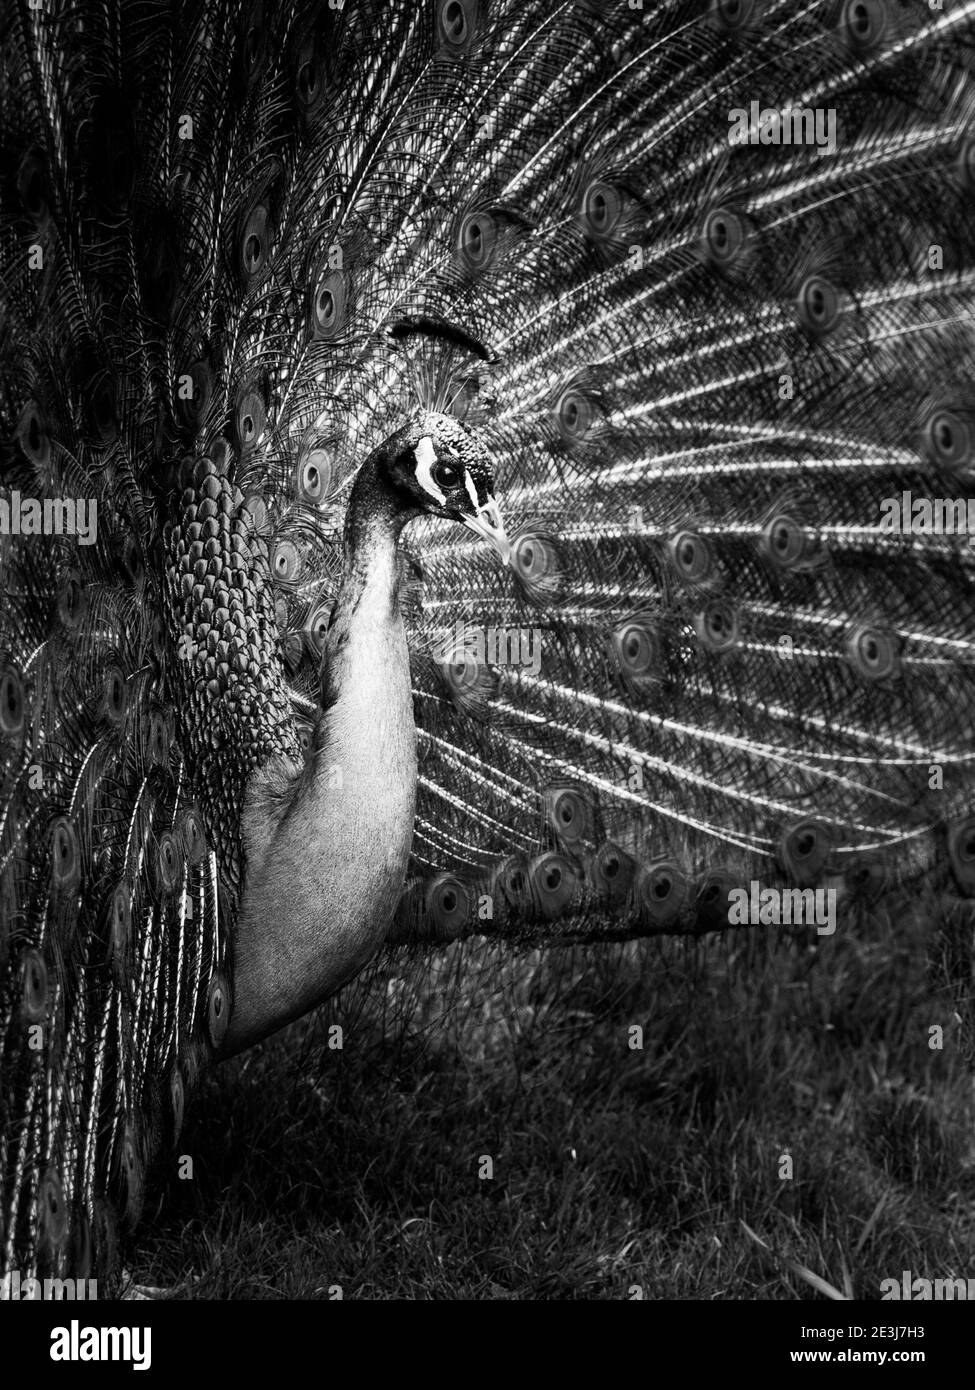 Close-up portrait of peacock with spread feathers. Low key image. Black and white image. Stock Photo